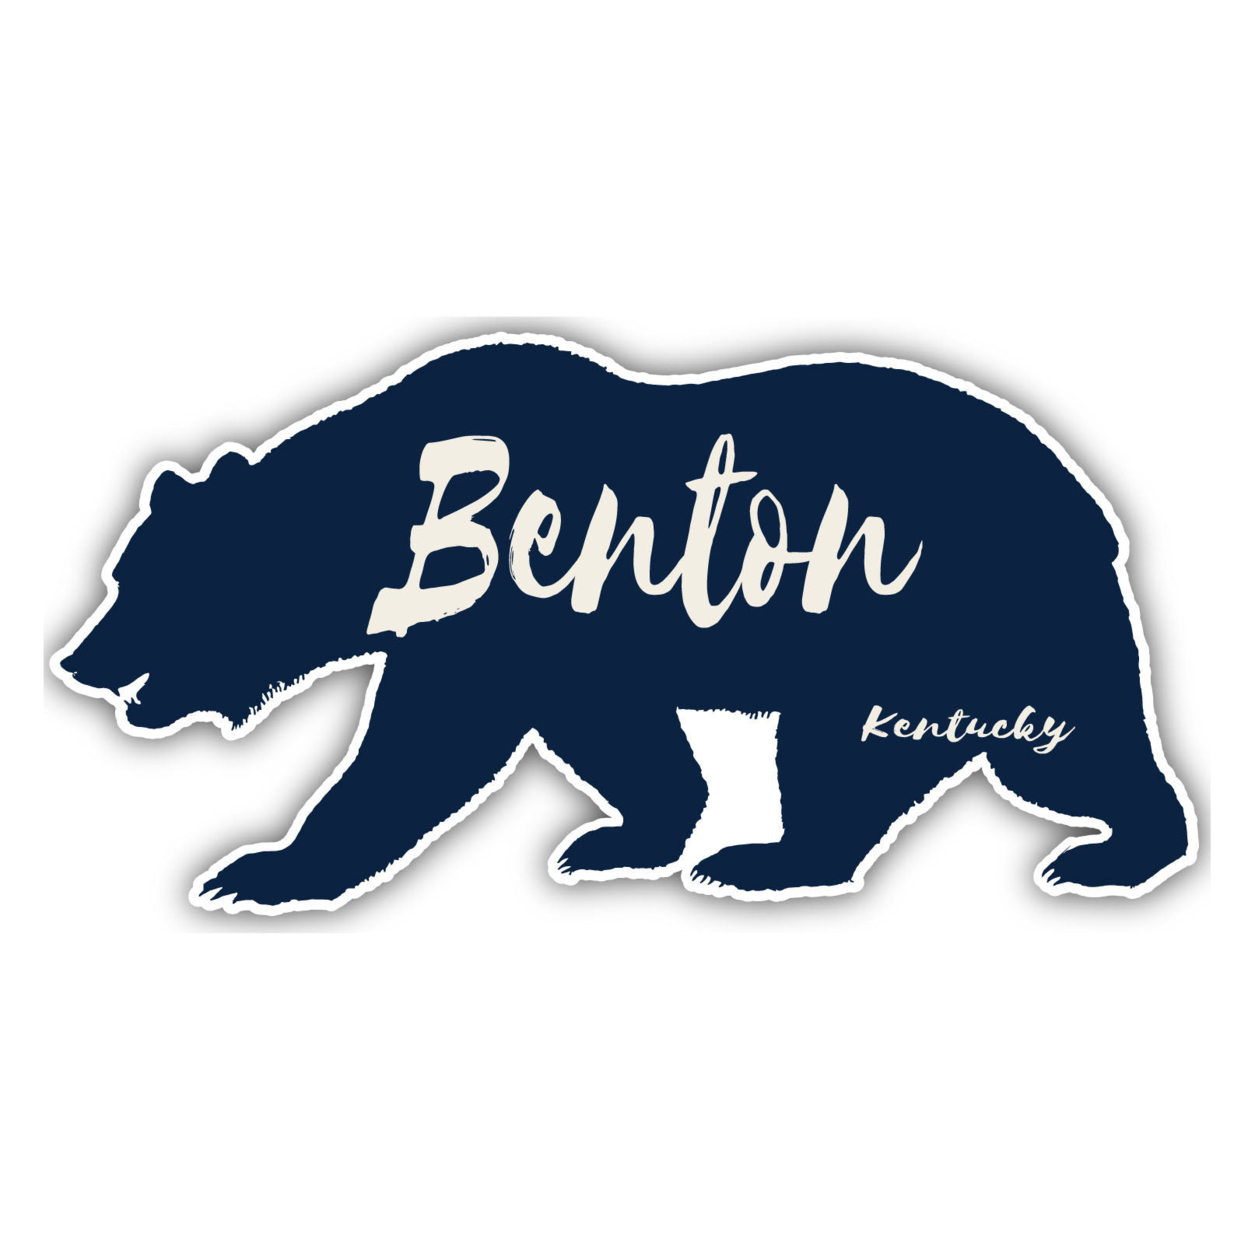 Benton Kentucky Souvenir Decorative Stickers (Choose Theme And Size) - 4-Pack, 2-Inch, Great Outdoors